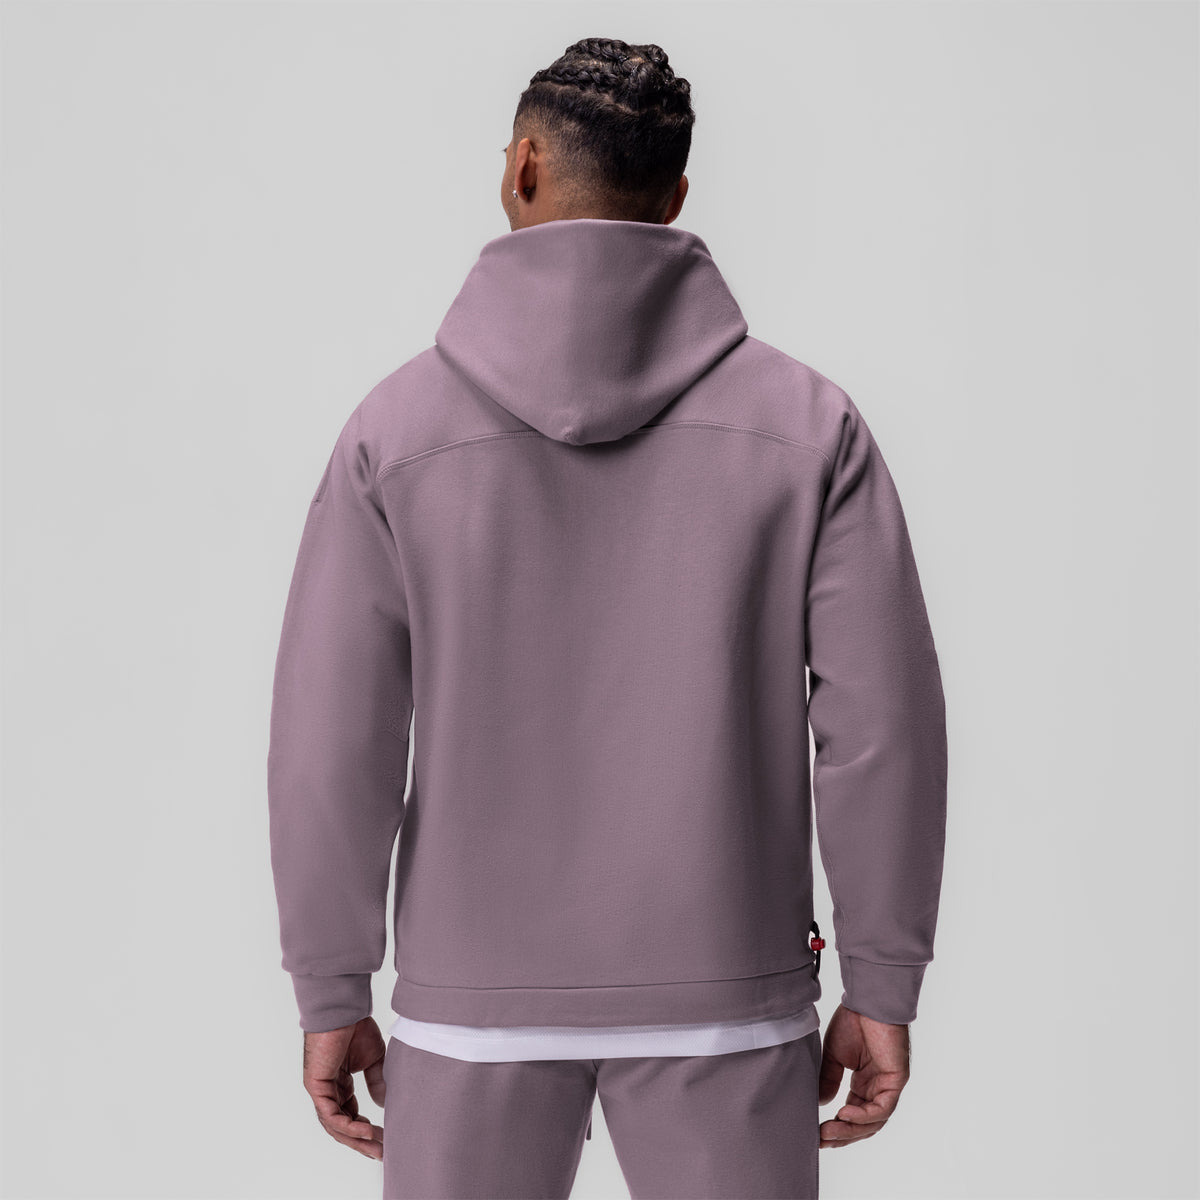 ASRV Tech-Terry Weather-Ready Training Hoodie